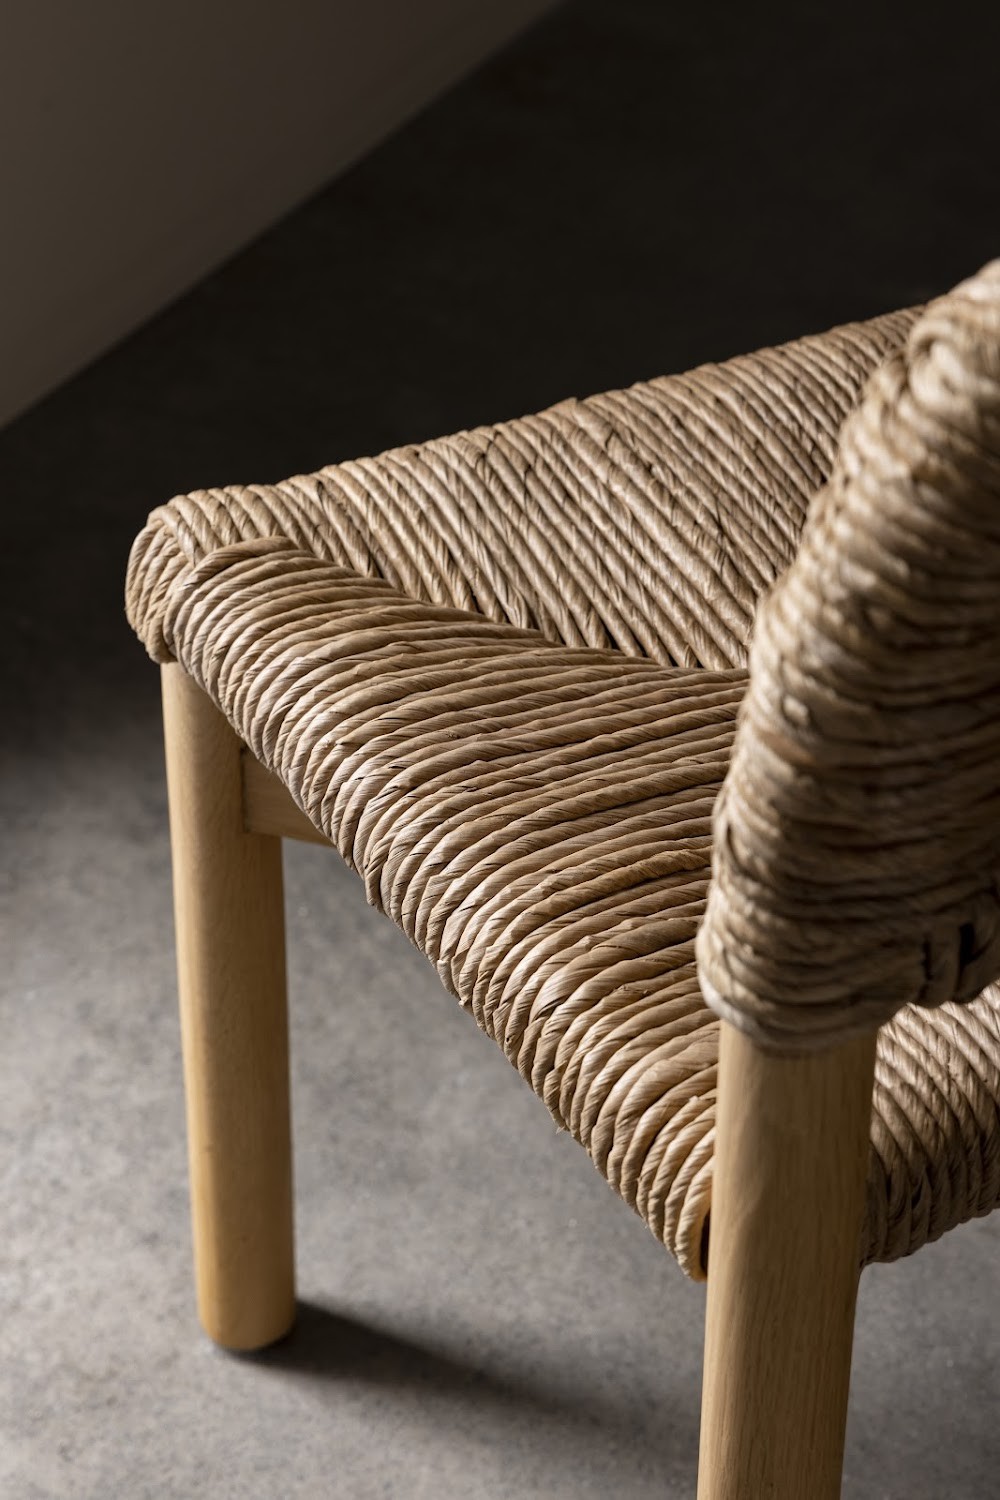 a close up of a wooden chair with a woven seat